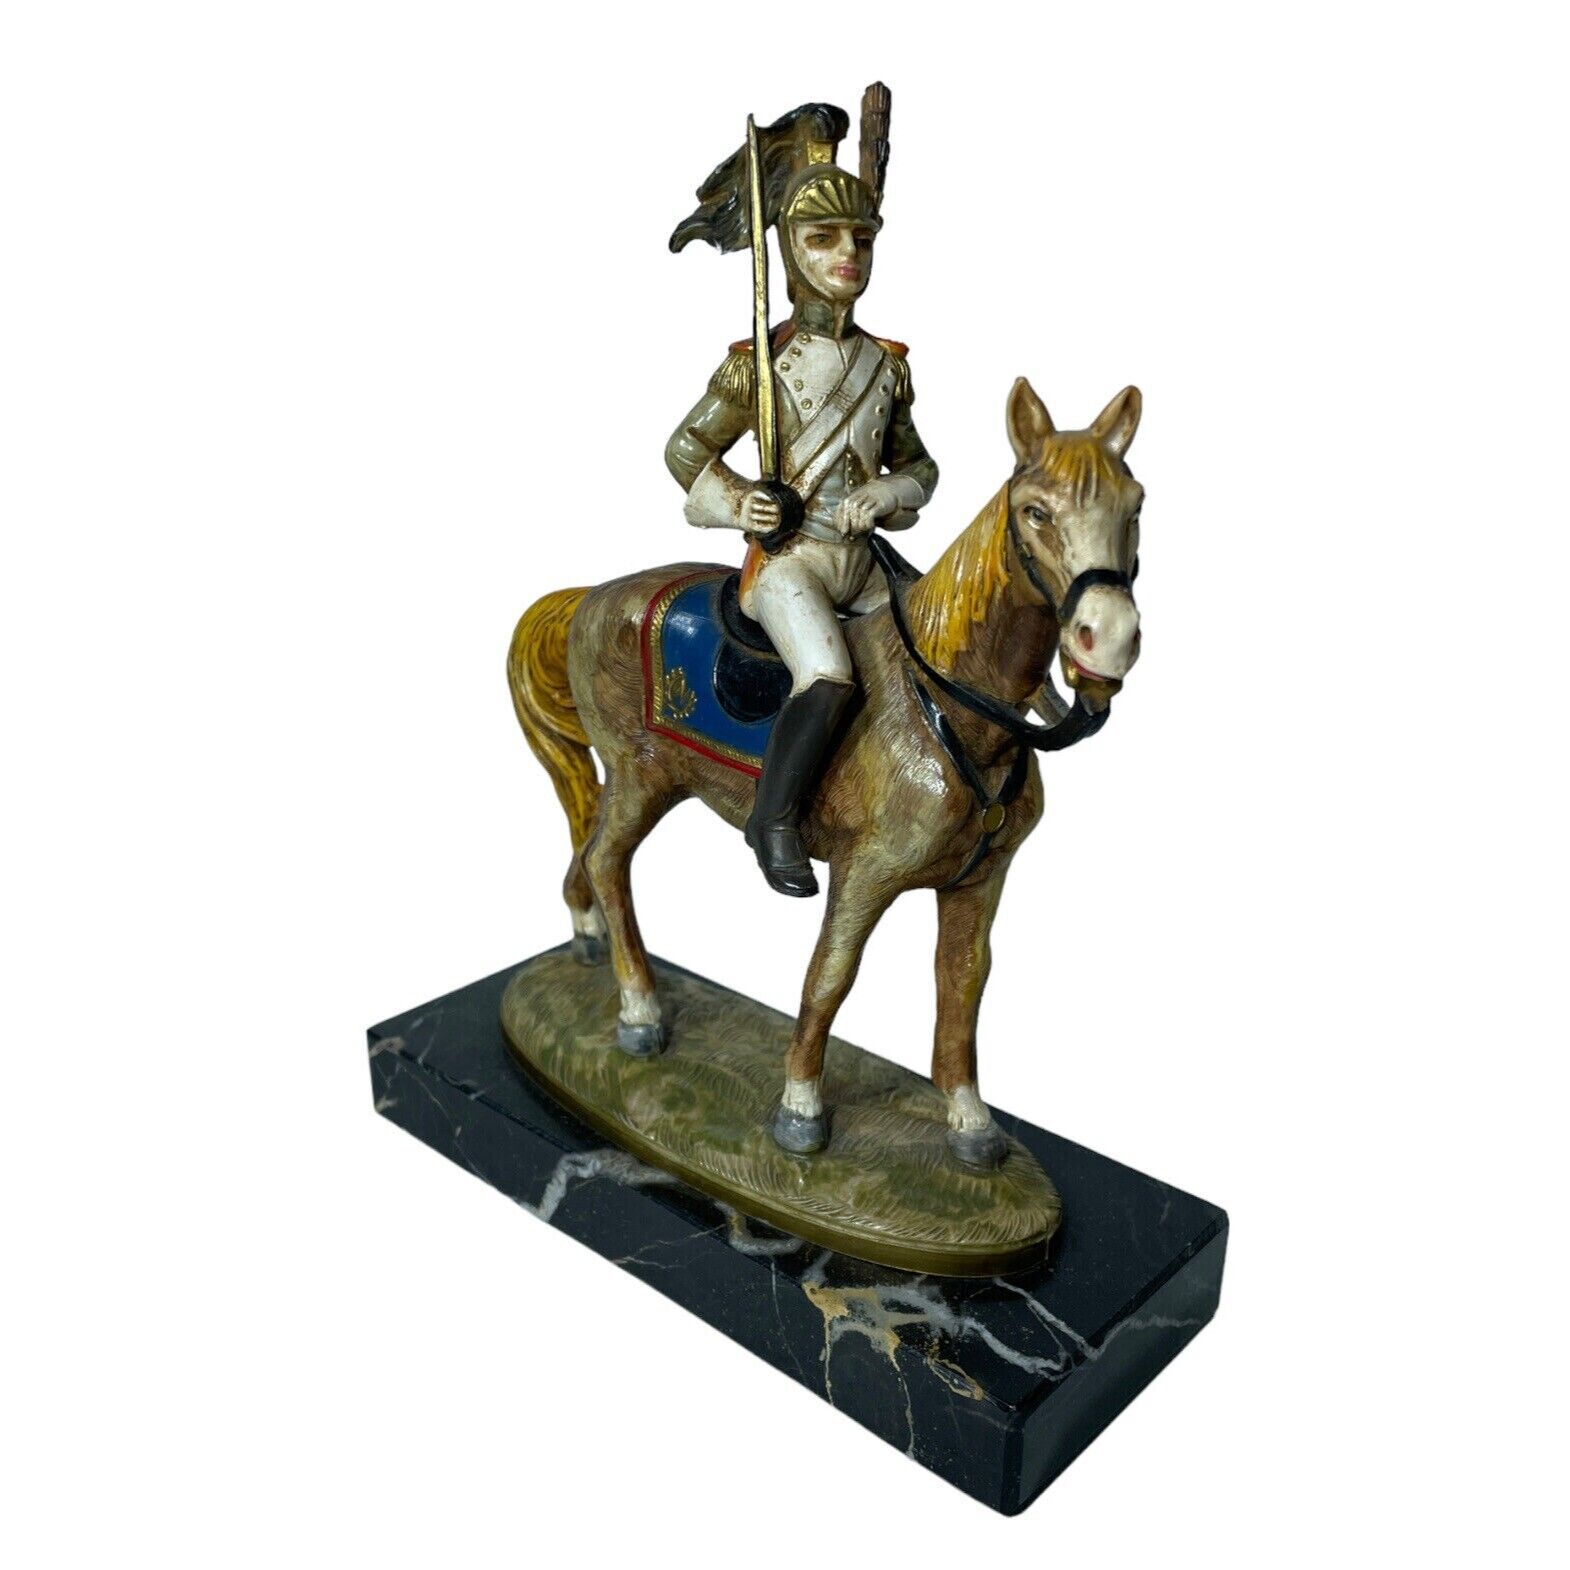 Vintage Depose Italy 426 French Soldier on Horse Figurine on Carrara Marble